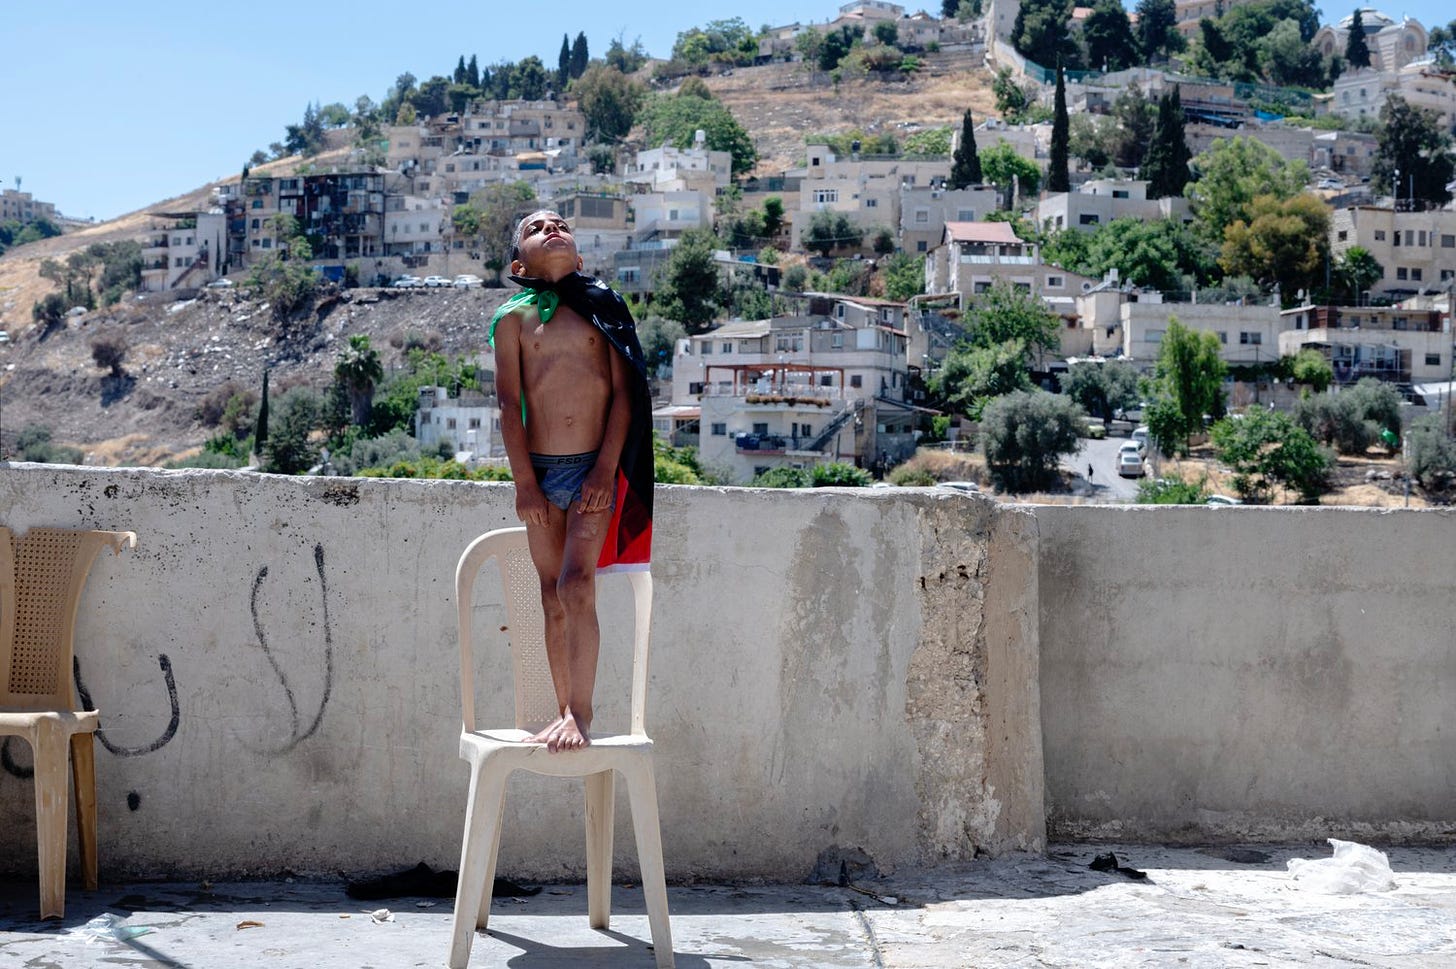 "Thaer al Rajabi, nine, wears a Palestinian flag as a cape while playing on the rooftop where his father, Kayed al Rajabi, set up an inflatable pool to make up for a missed vacation by the sea after Ramadan. “There was too much fear for us to leave our house,” says the 34-year-old father of eight. “So I brought them this pool.” The Palestinian family faces possible eviction from their home in the Silwan district of East Jerusalem because an Israeli settler organization sued, claiming the land had been owned by a Jewish trust more than a century ago. The United Nations estimates that 970 Palestinians in the city are threatened with eviction due to cases brought mainly by settler organizations."